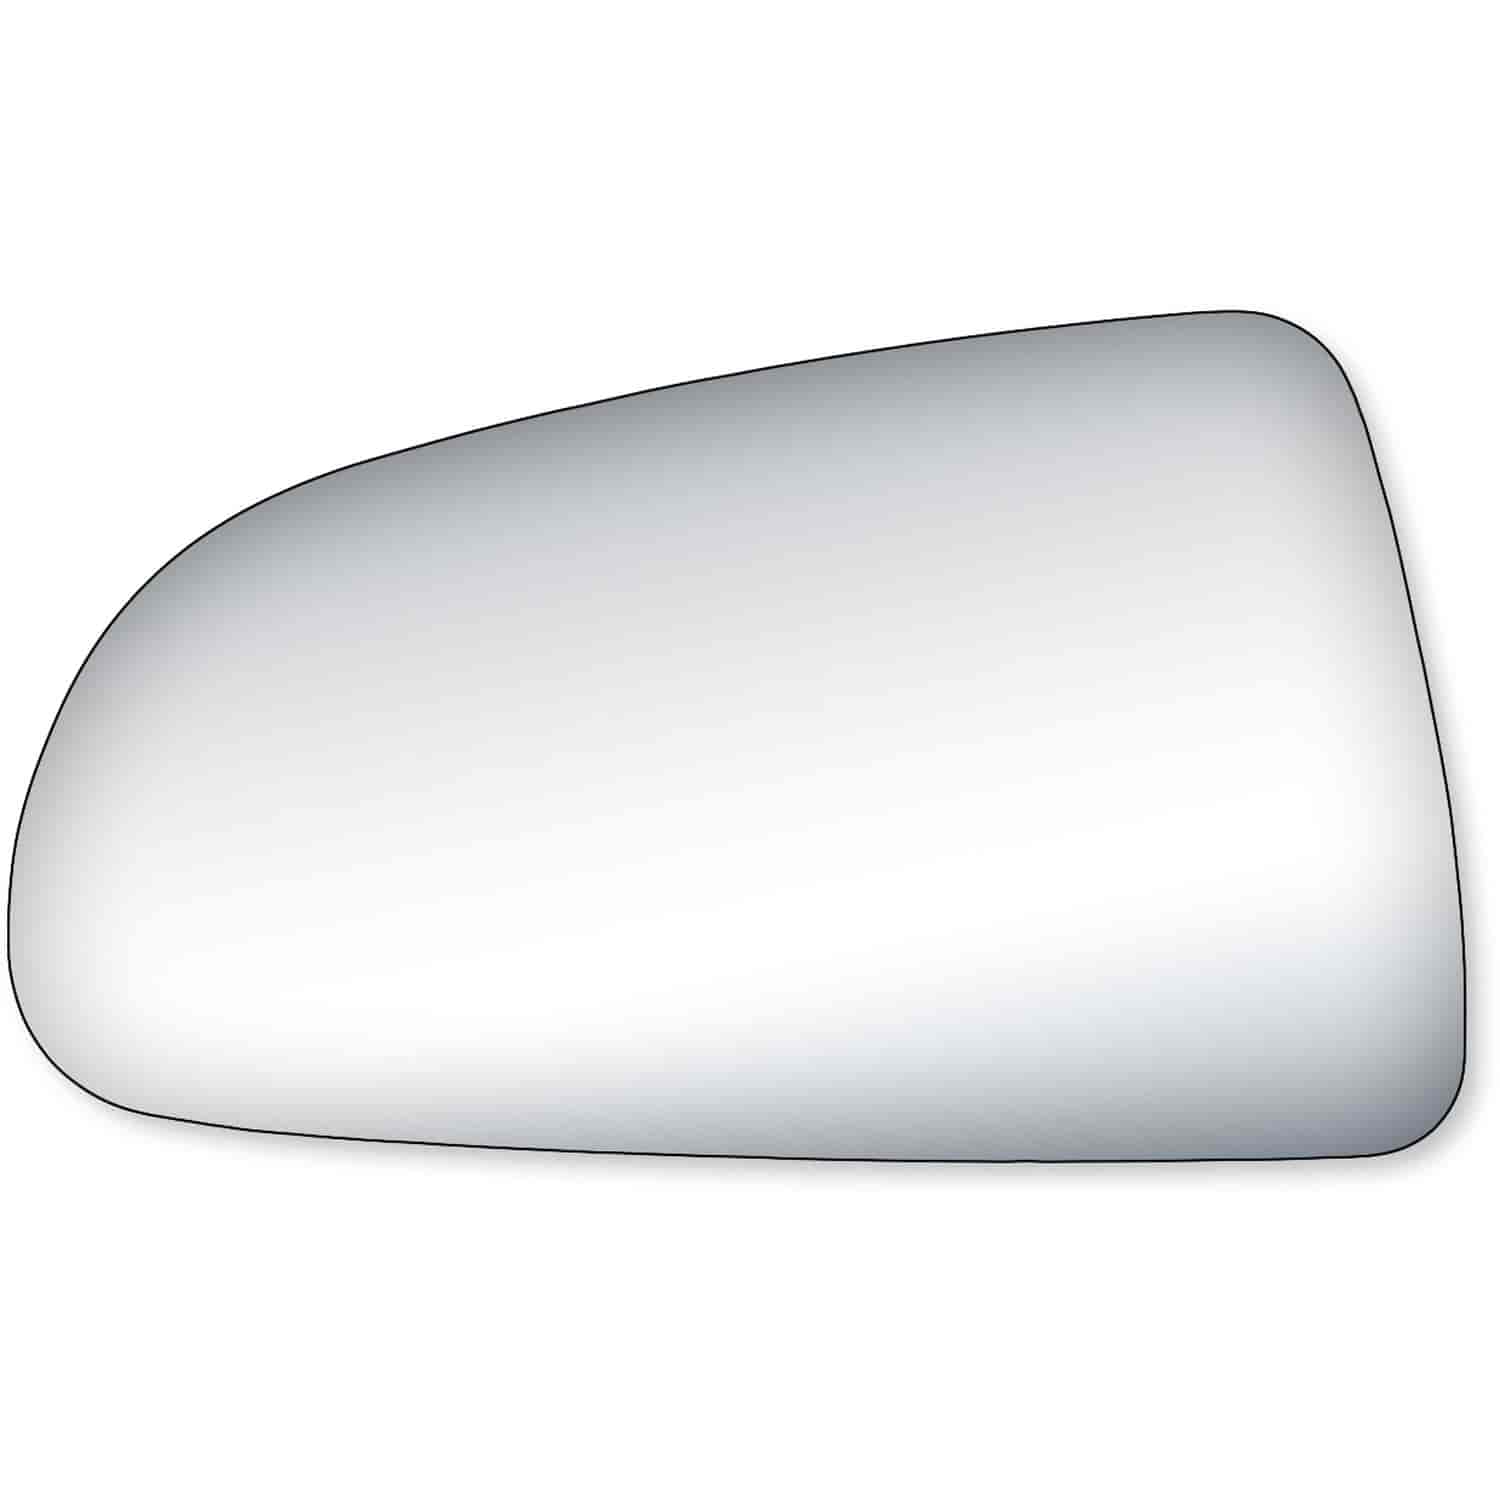 Replacement Glass for 05-10 Dakota 5x7 non-foldaway the glass measures 4 15/16 tall by 8 5/8 wide an